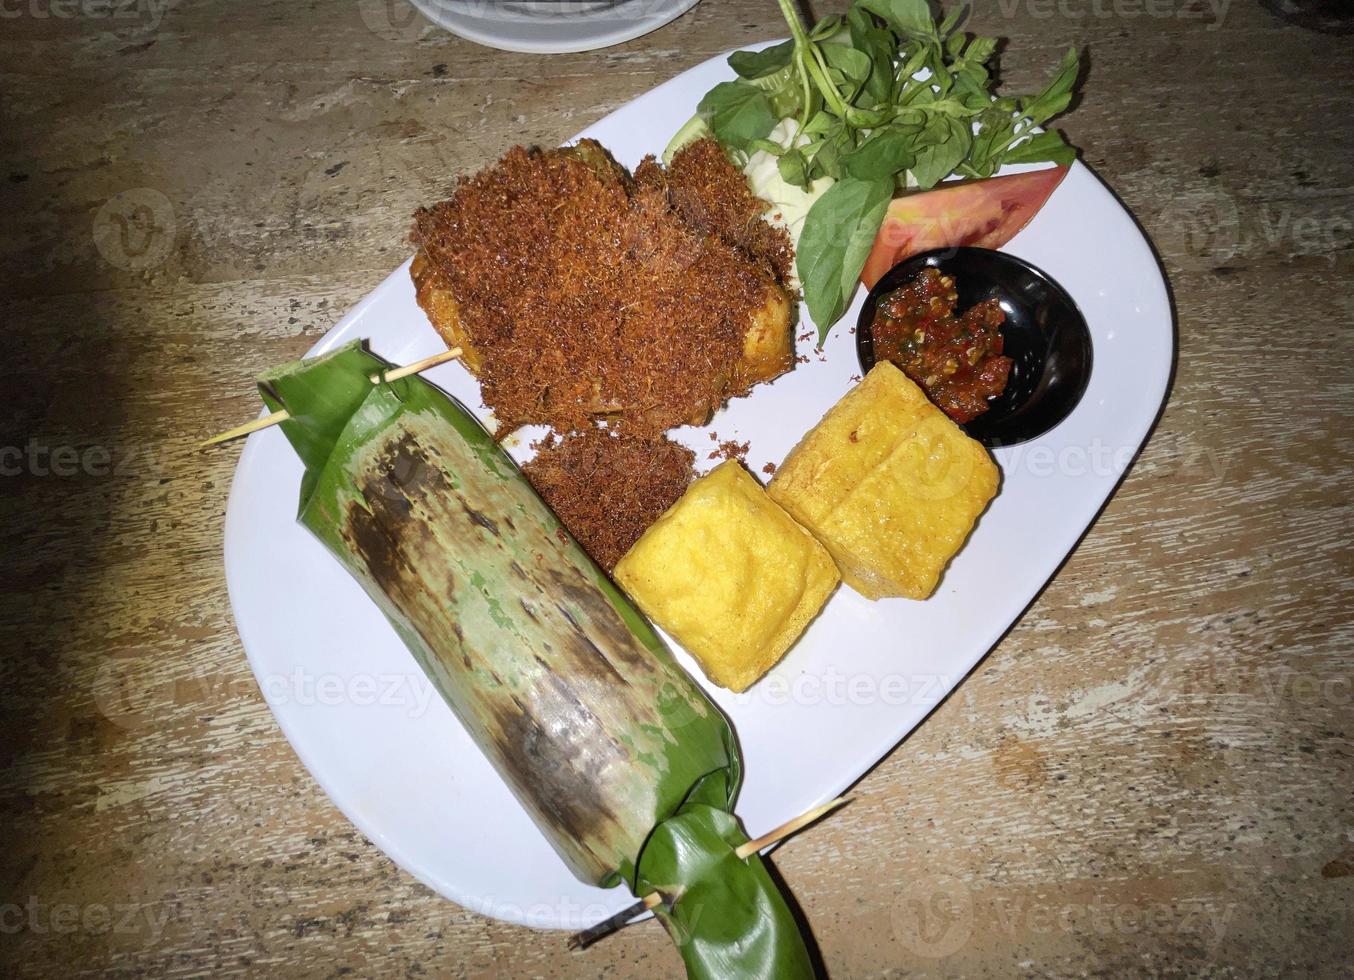 Grilled Rice wrapped in Banana Leaf - Indonesian Traditional Food, Nasi Bakar photo